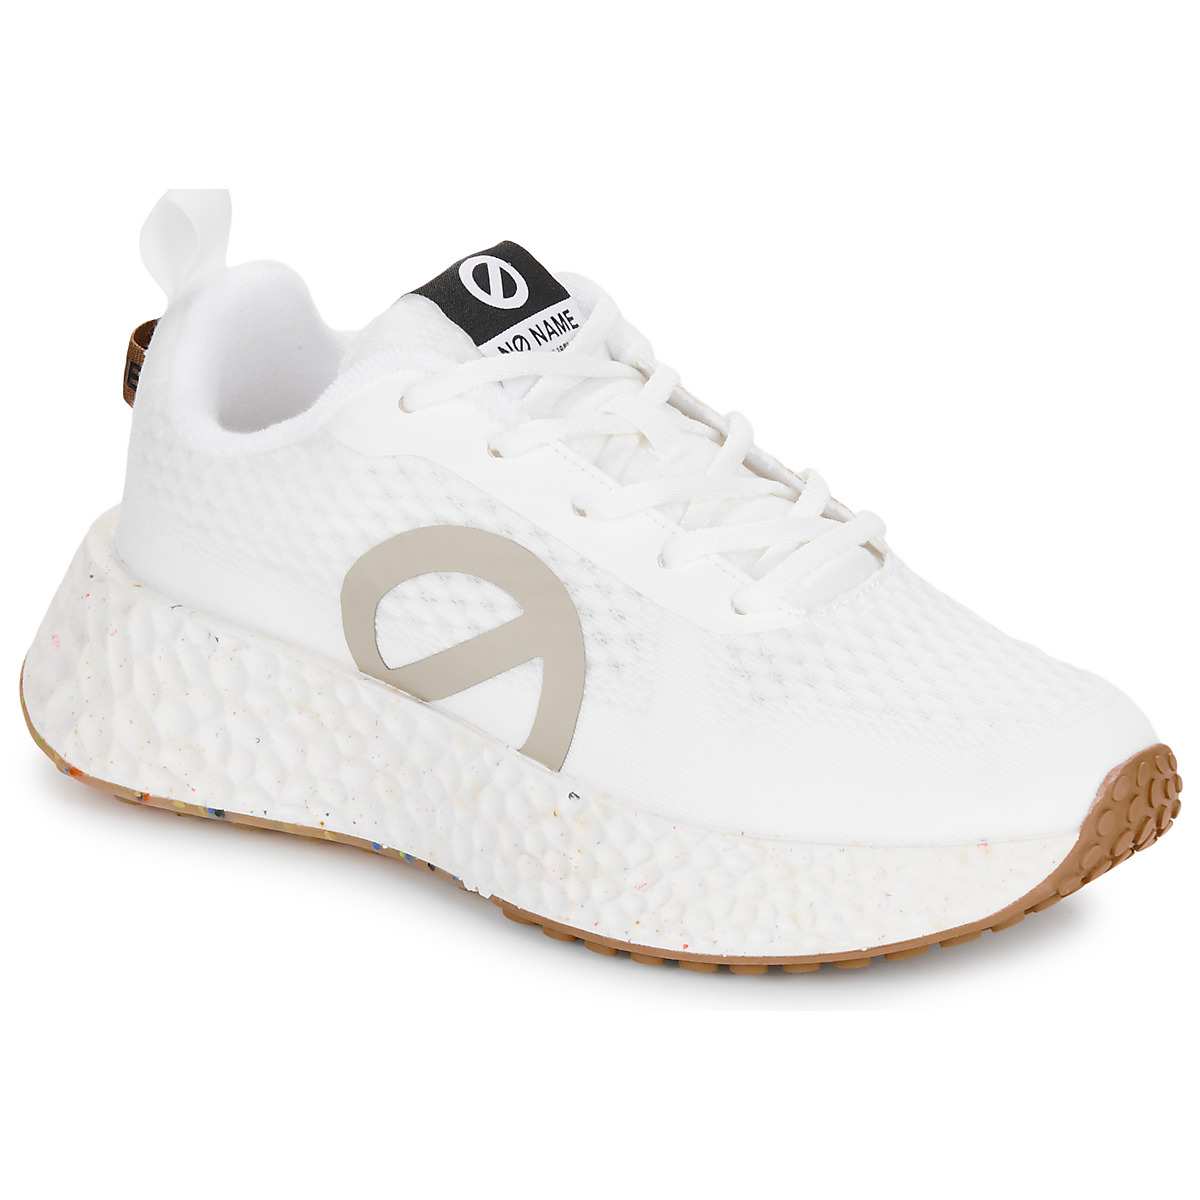 Scarpe Donna Sneakers basse No Name CARTER FLY W Bianco